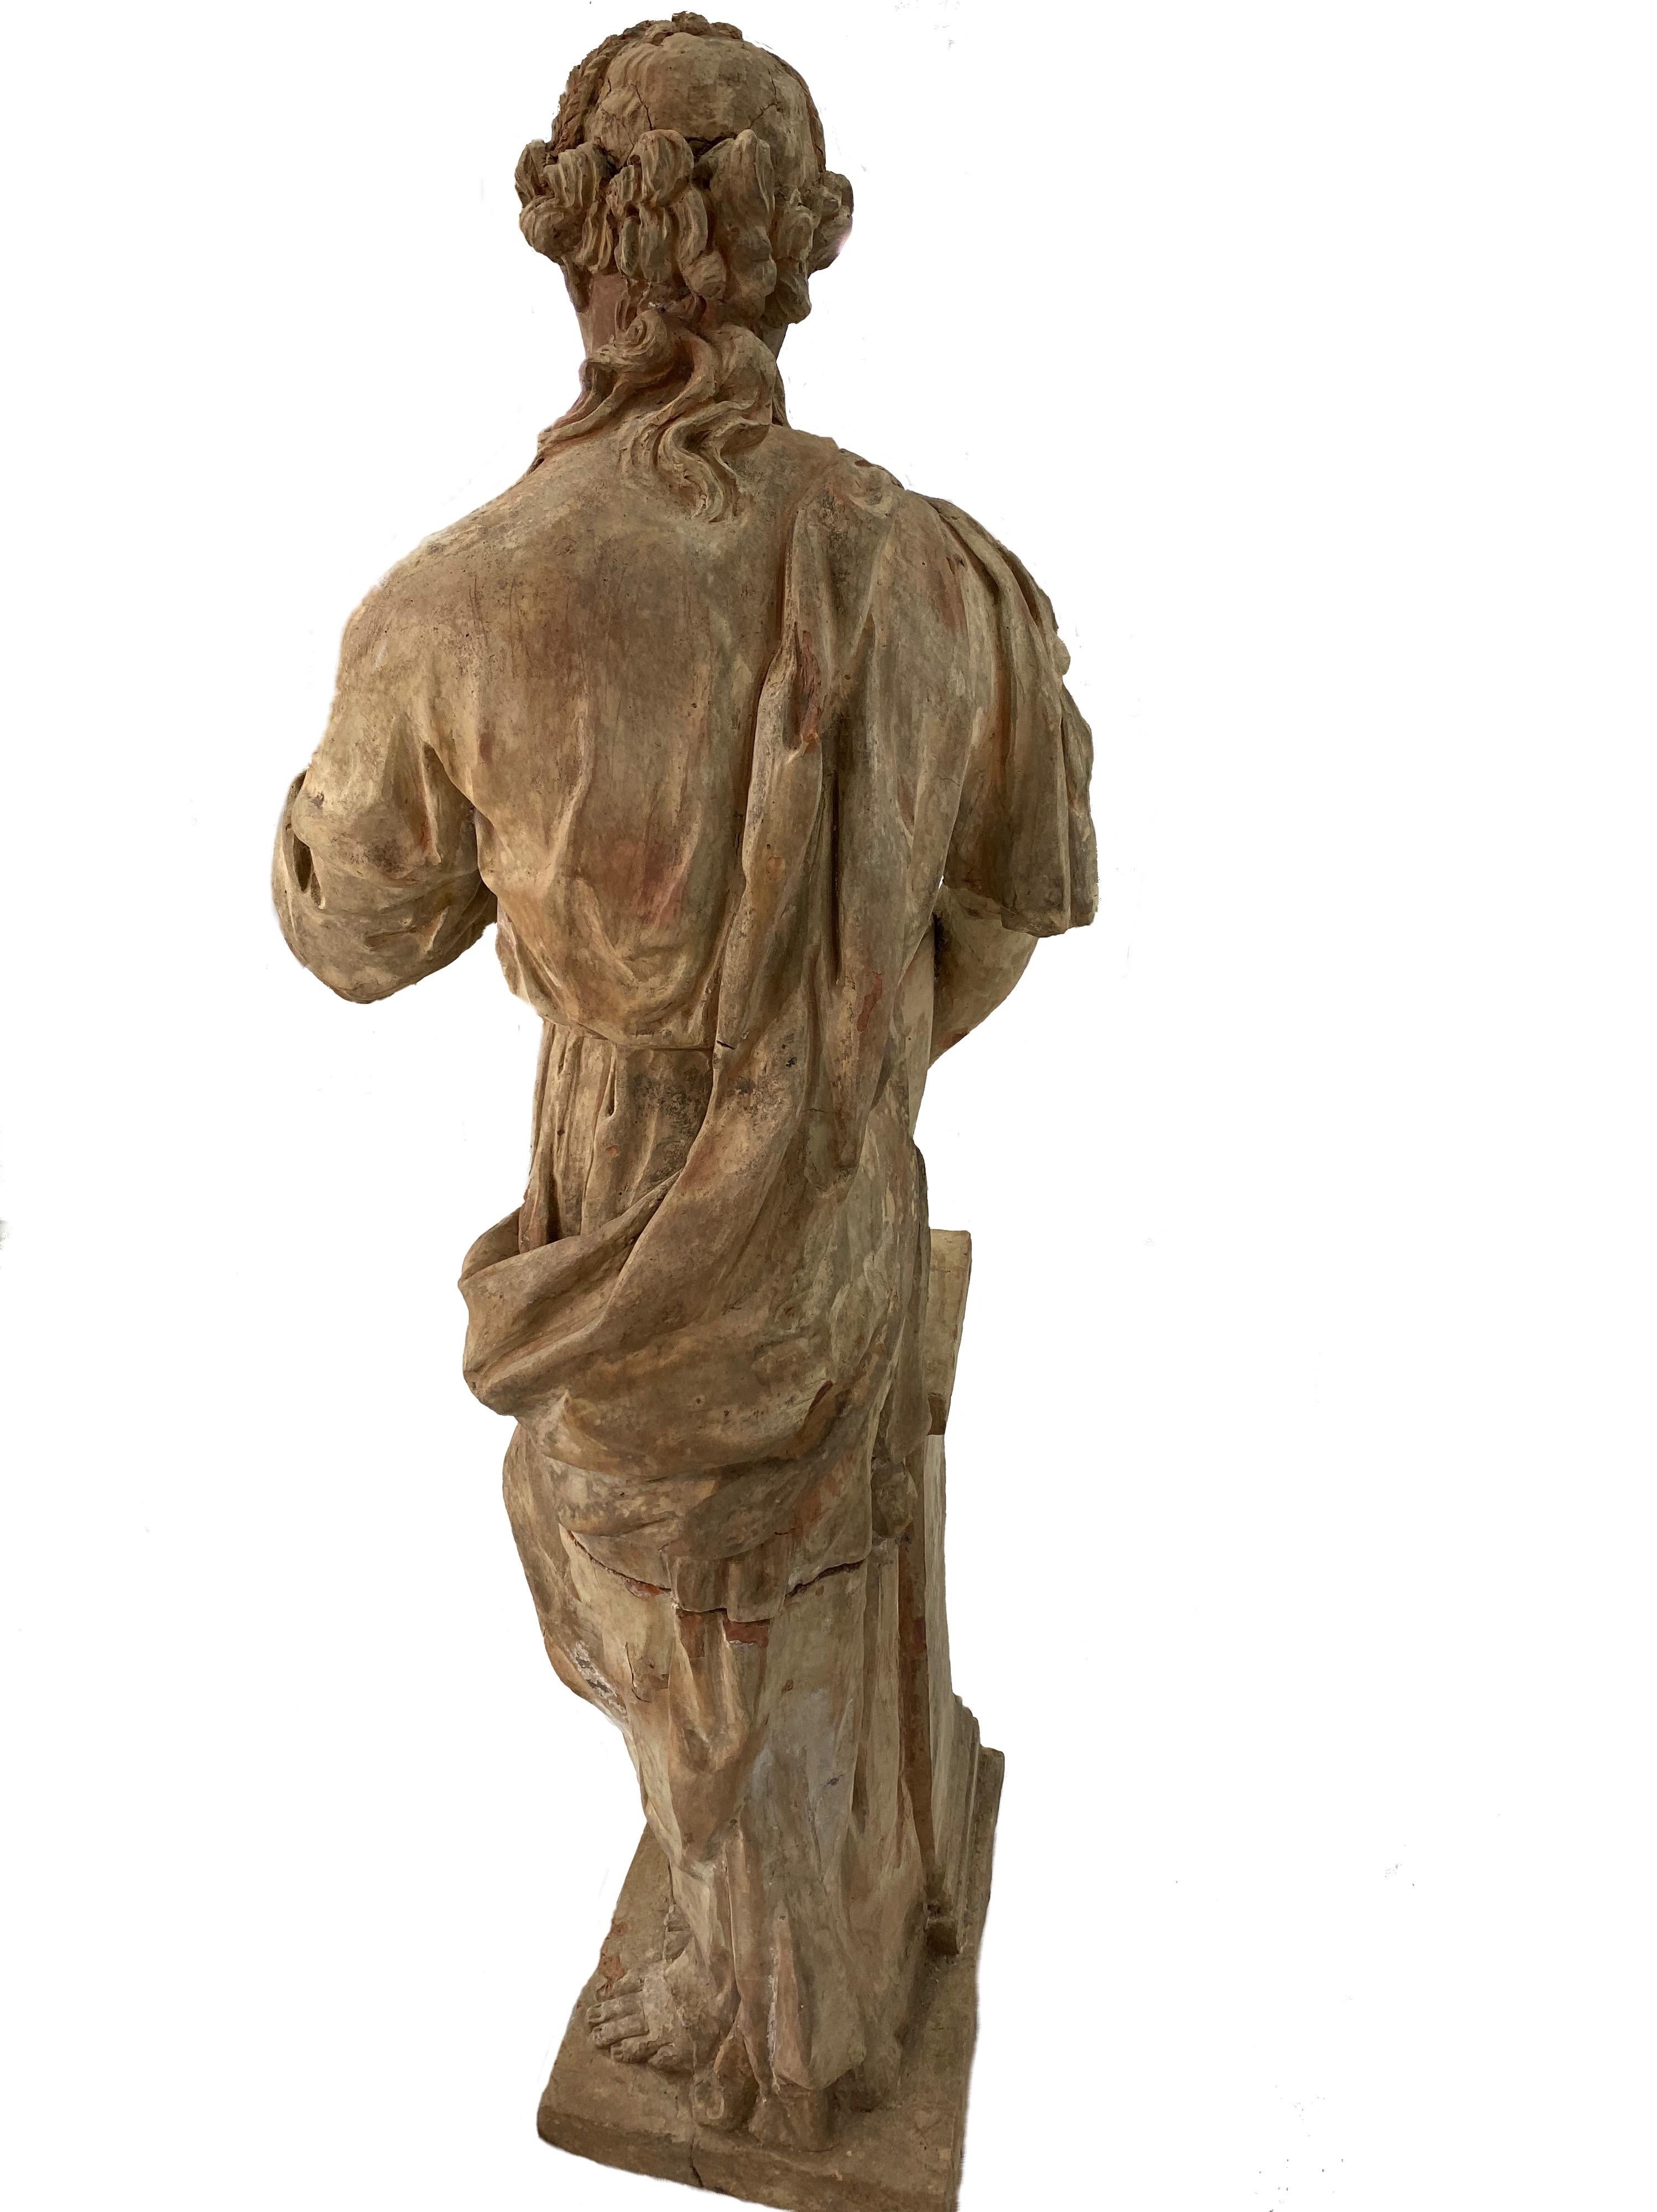 Gorgeous large 18th century French terracotta statue of a maiden. Hand chiseled and signed by artist.